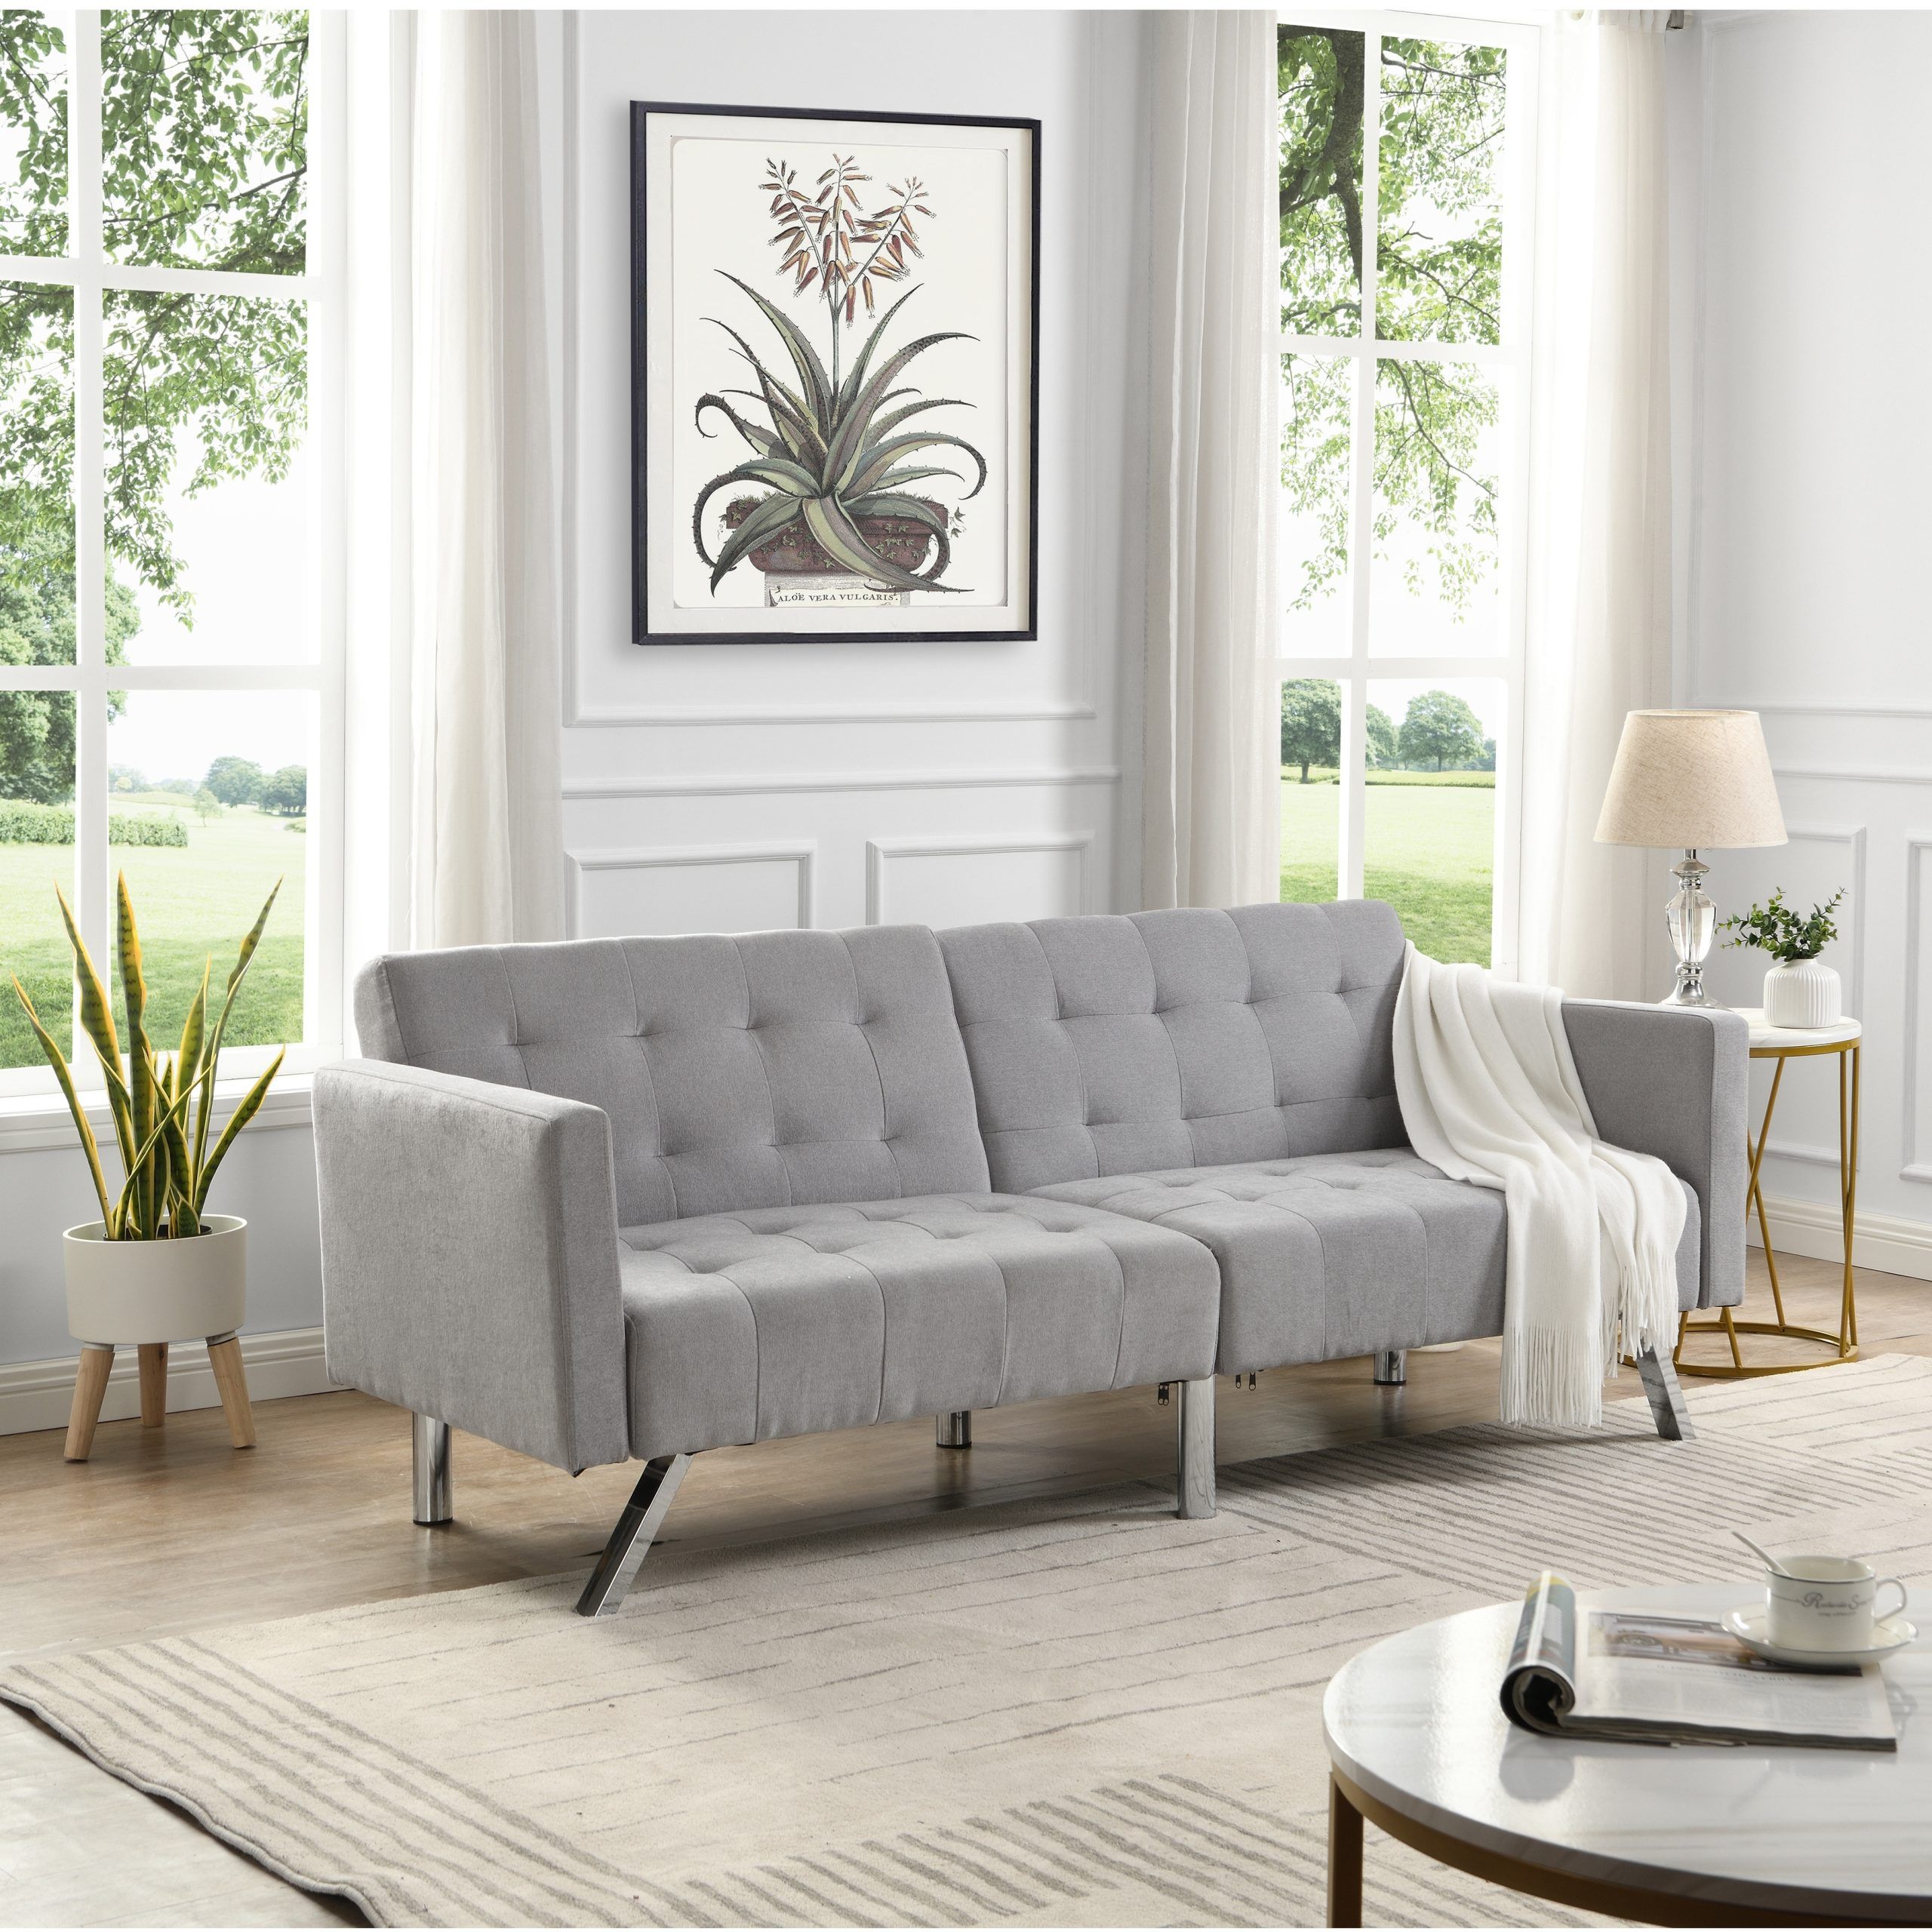 Convertible Folding Light Grey Sleeper Sofa With Armrests – Bed Bath &  Beyond – 37284175 Pertaining To Convertible Light Gray Chair Beds (View 9 of 15)